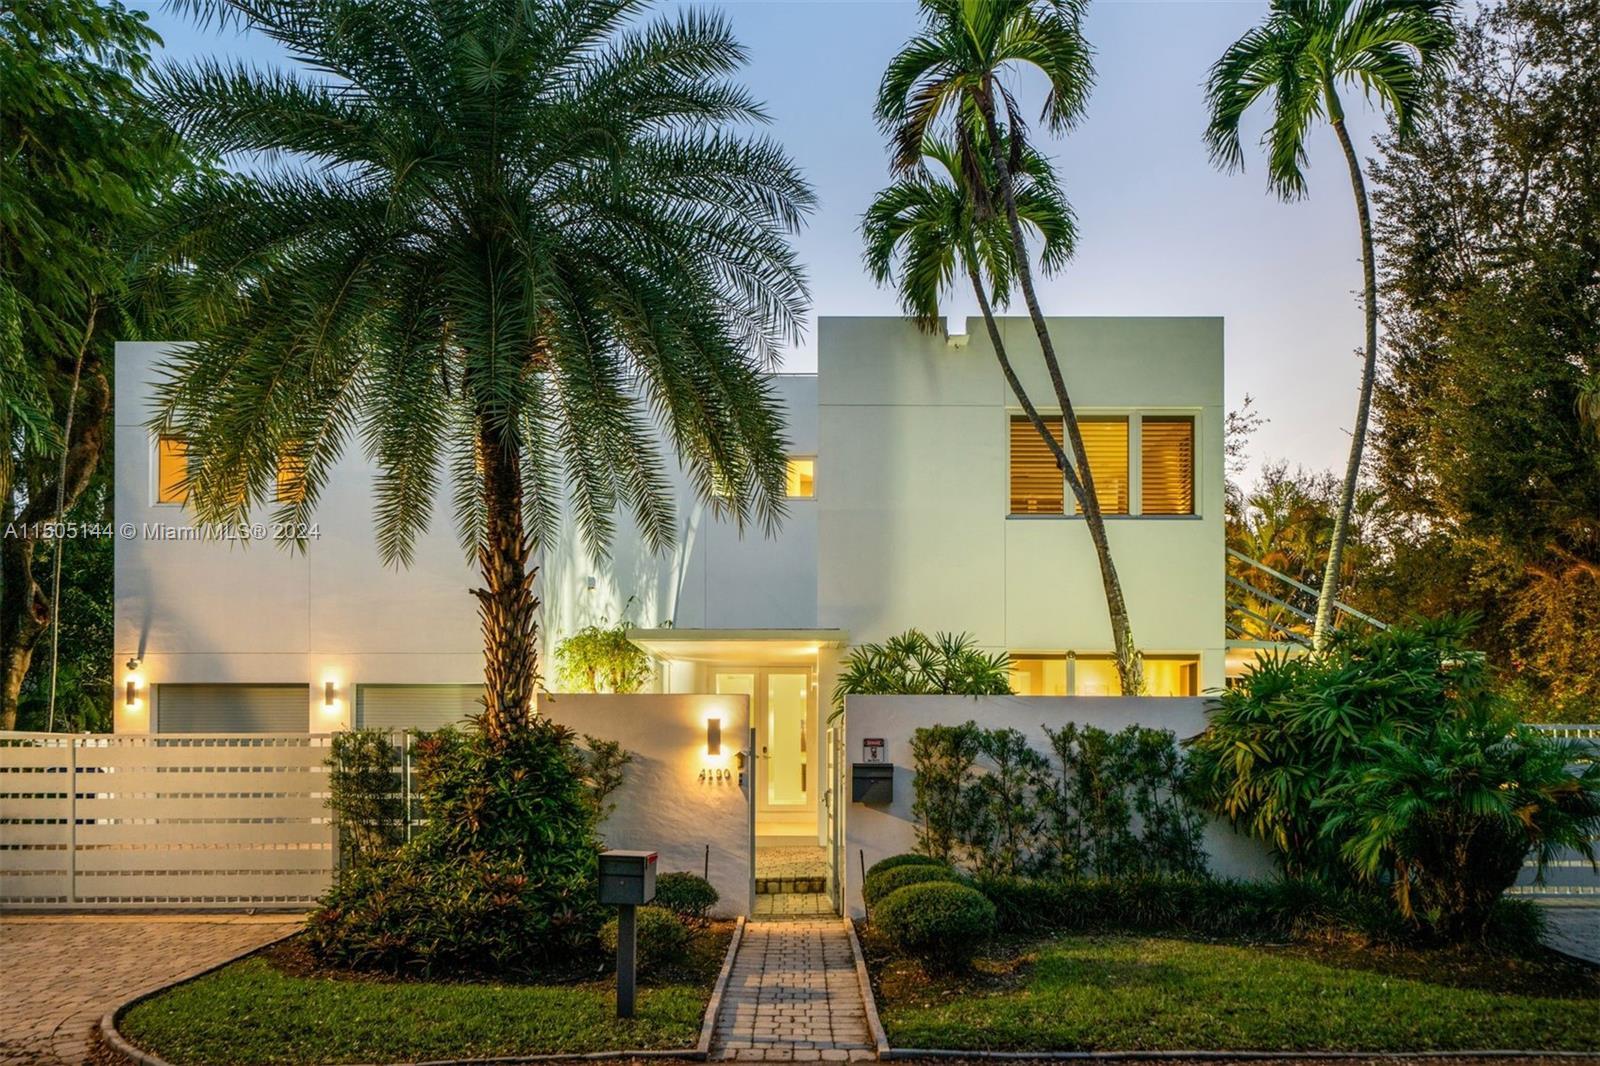 Discover your dream modern home in coveted Coconut Grove! This 3-bed, 3.5-bath, 3,385-square-foot re